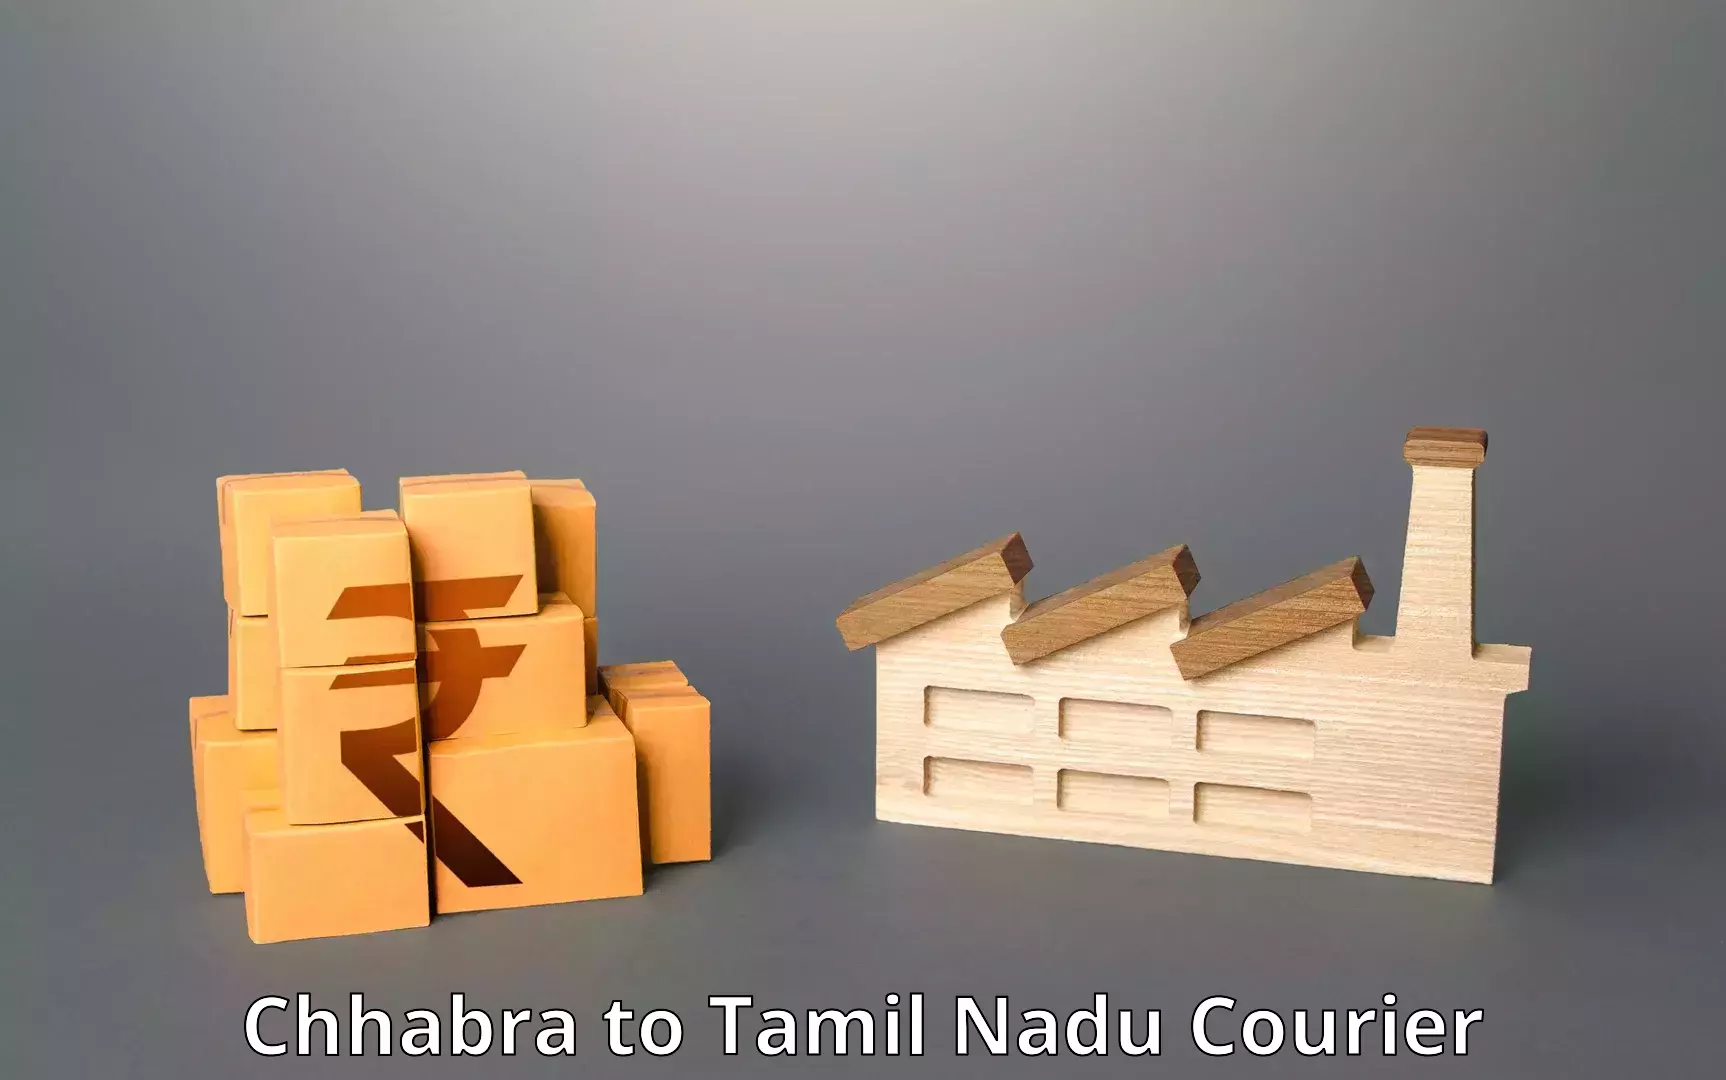 International courier networks Chhabra to Rajapalayam